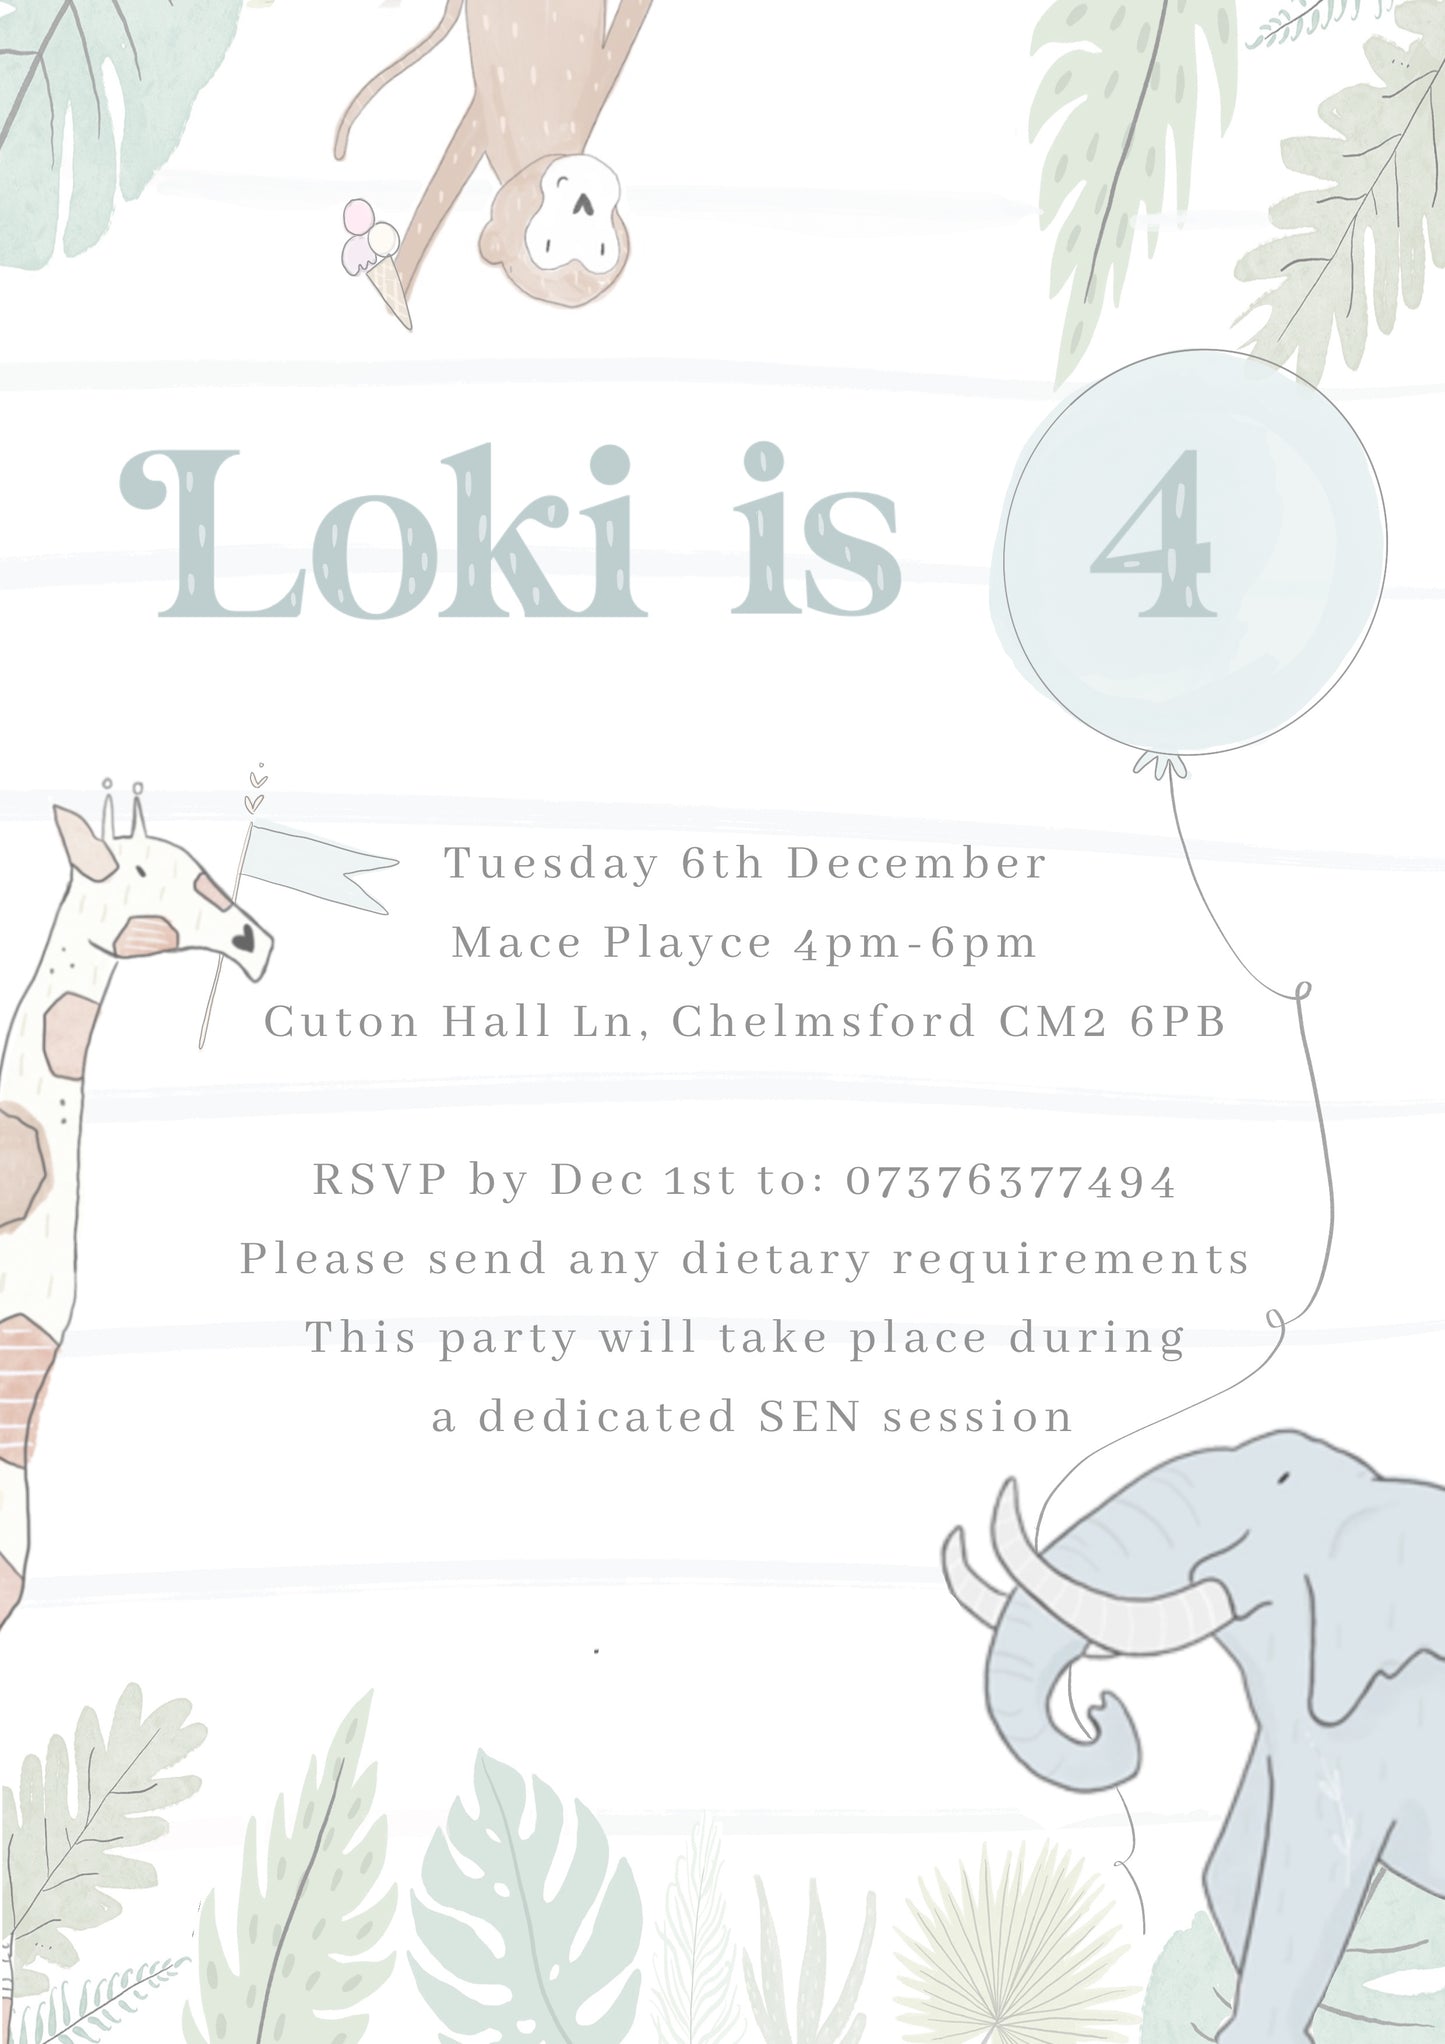 Bespoke Digital Invitation - created just for your event & perfect for WhatsApp - custom design